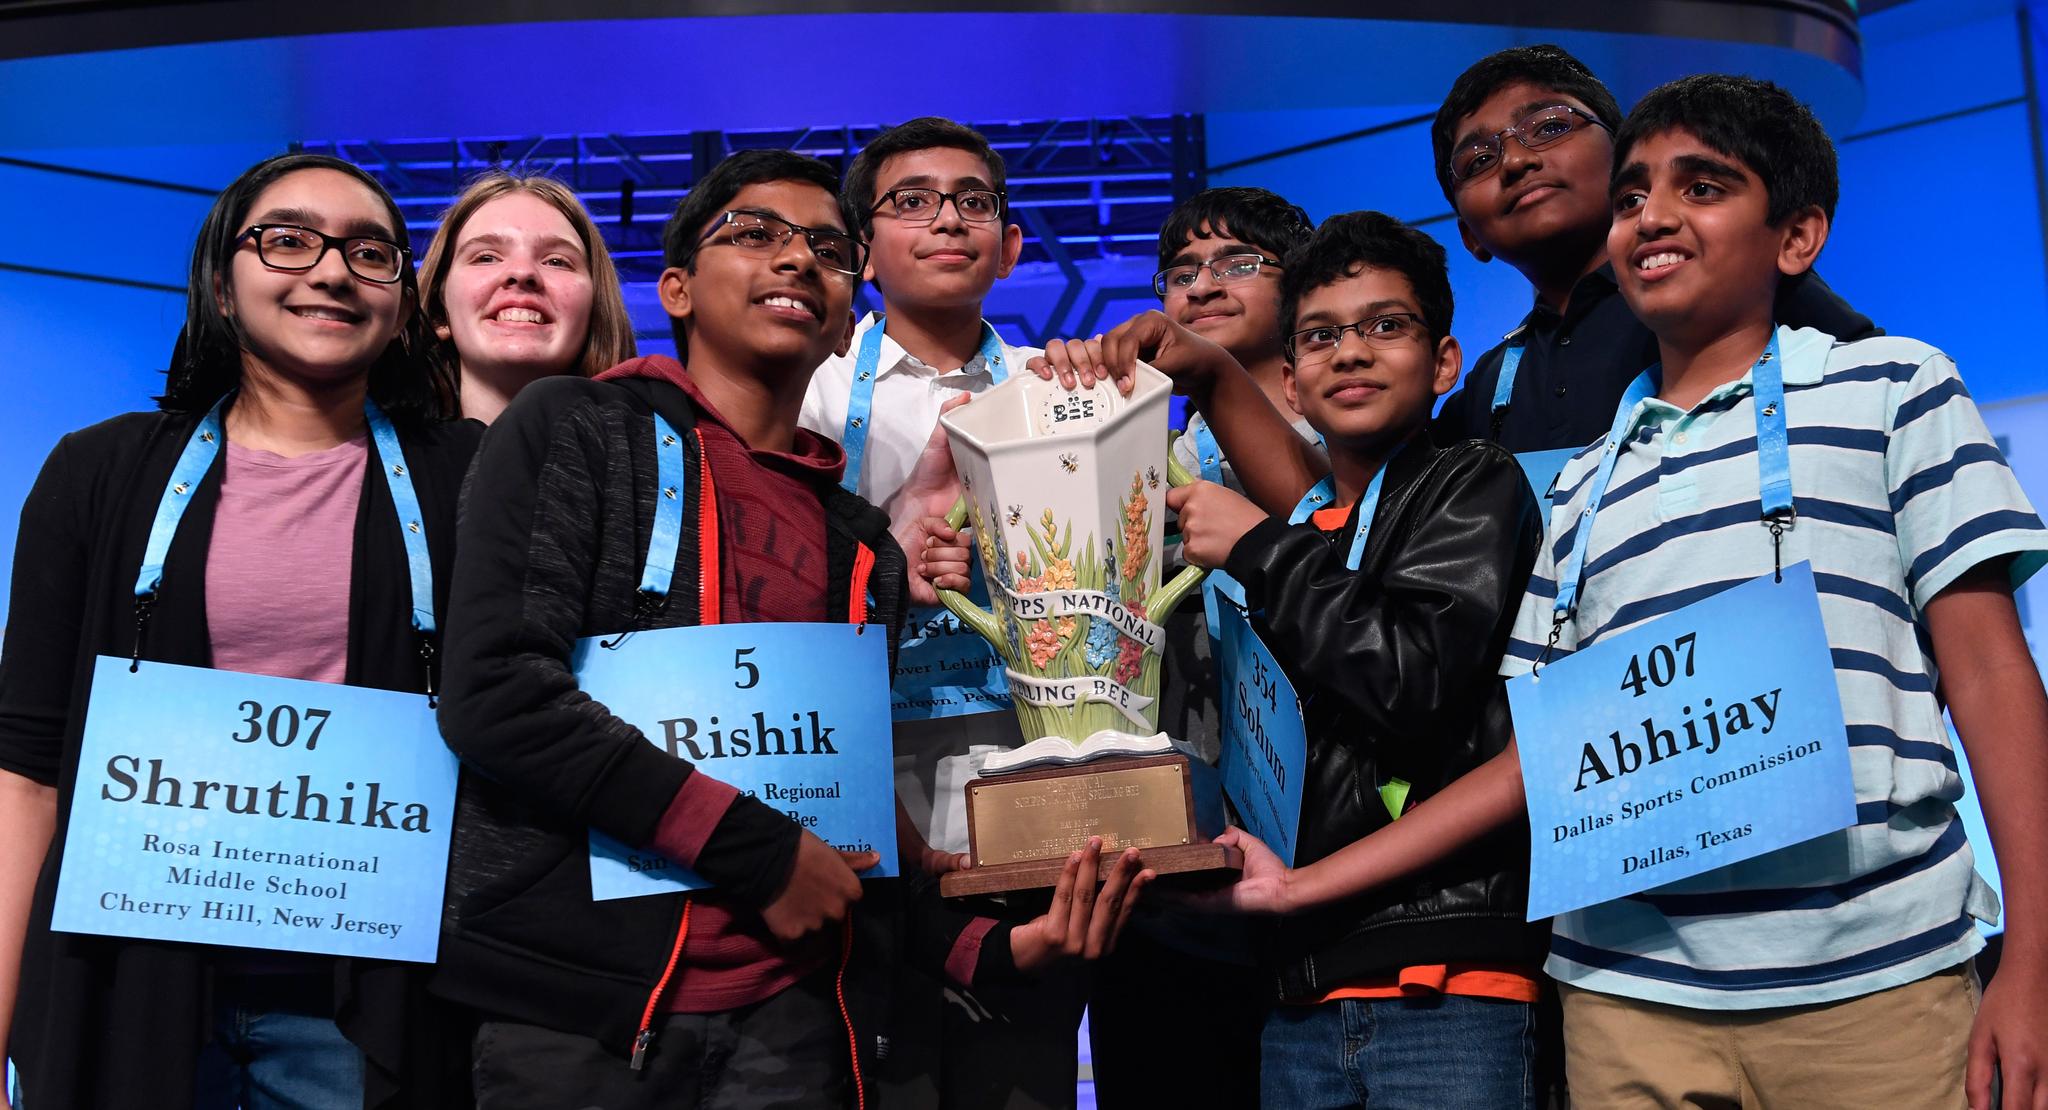 co-champions of the 2019 Scripps National Spelling Bee